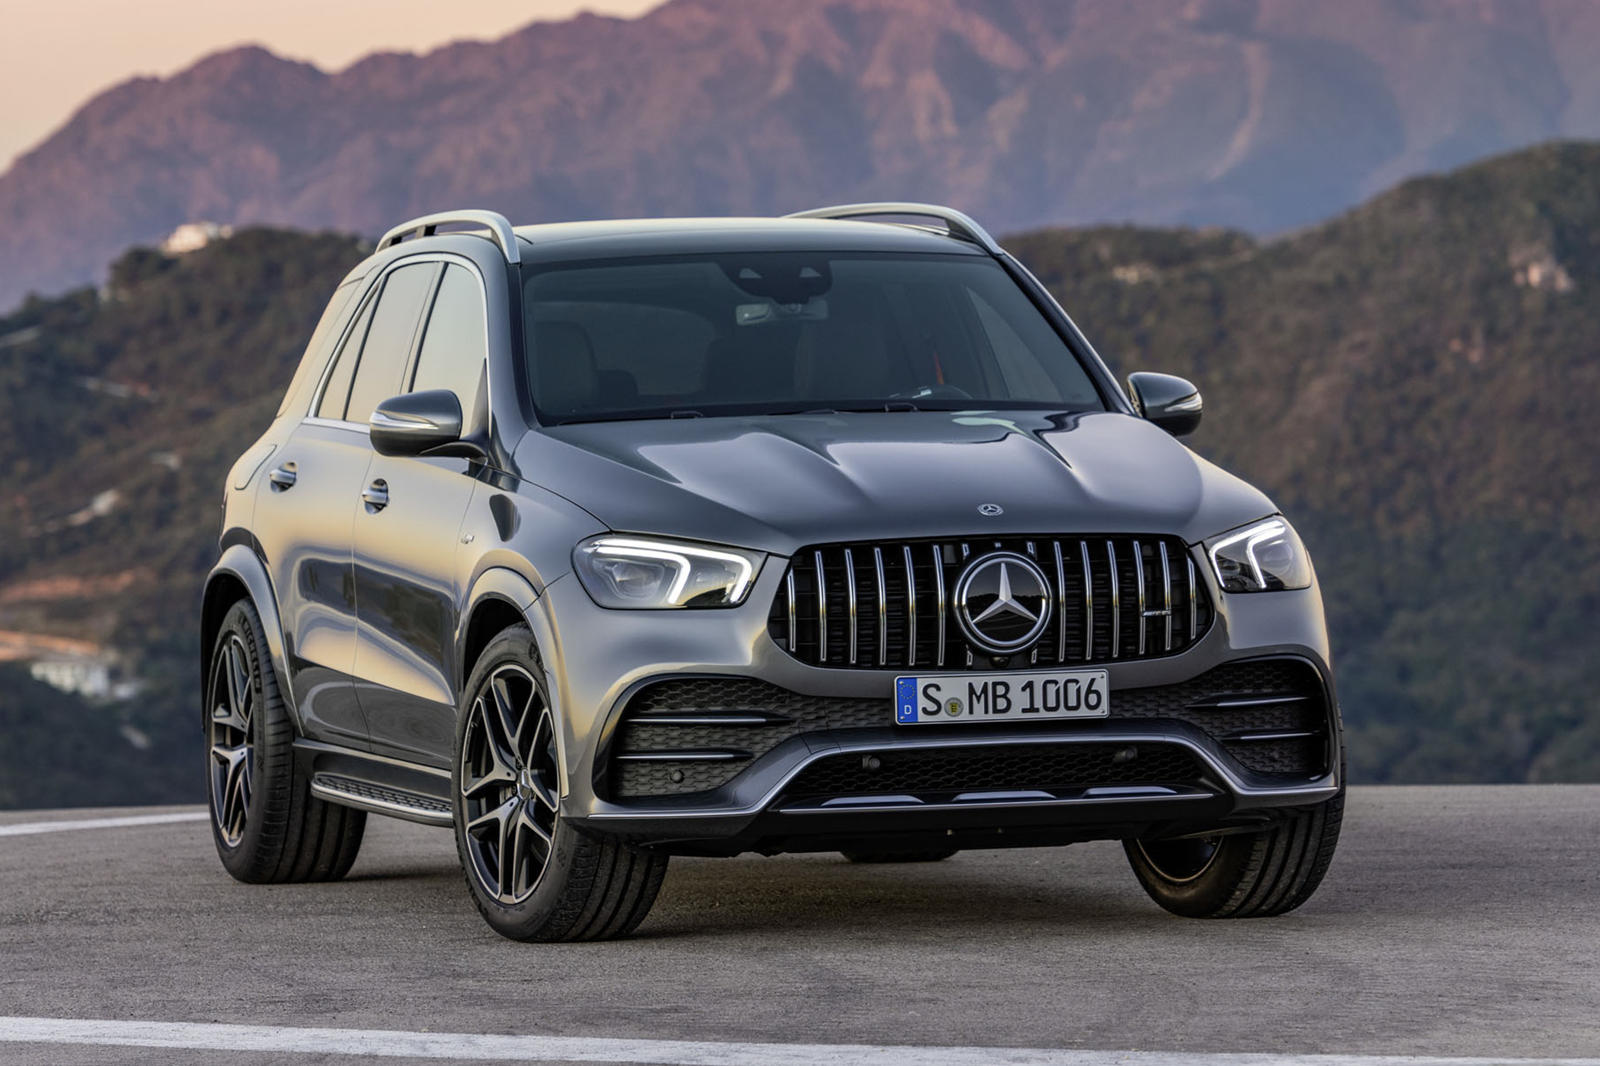 Used W167 Facelift Mercedes-AMG GLE 53 SUV For Sale | CarBuzz